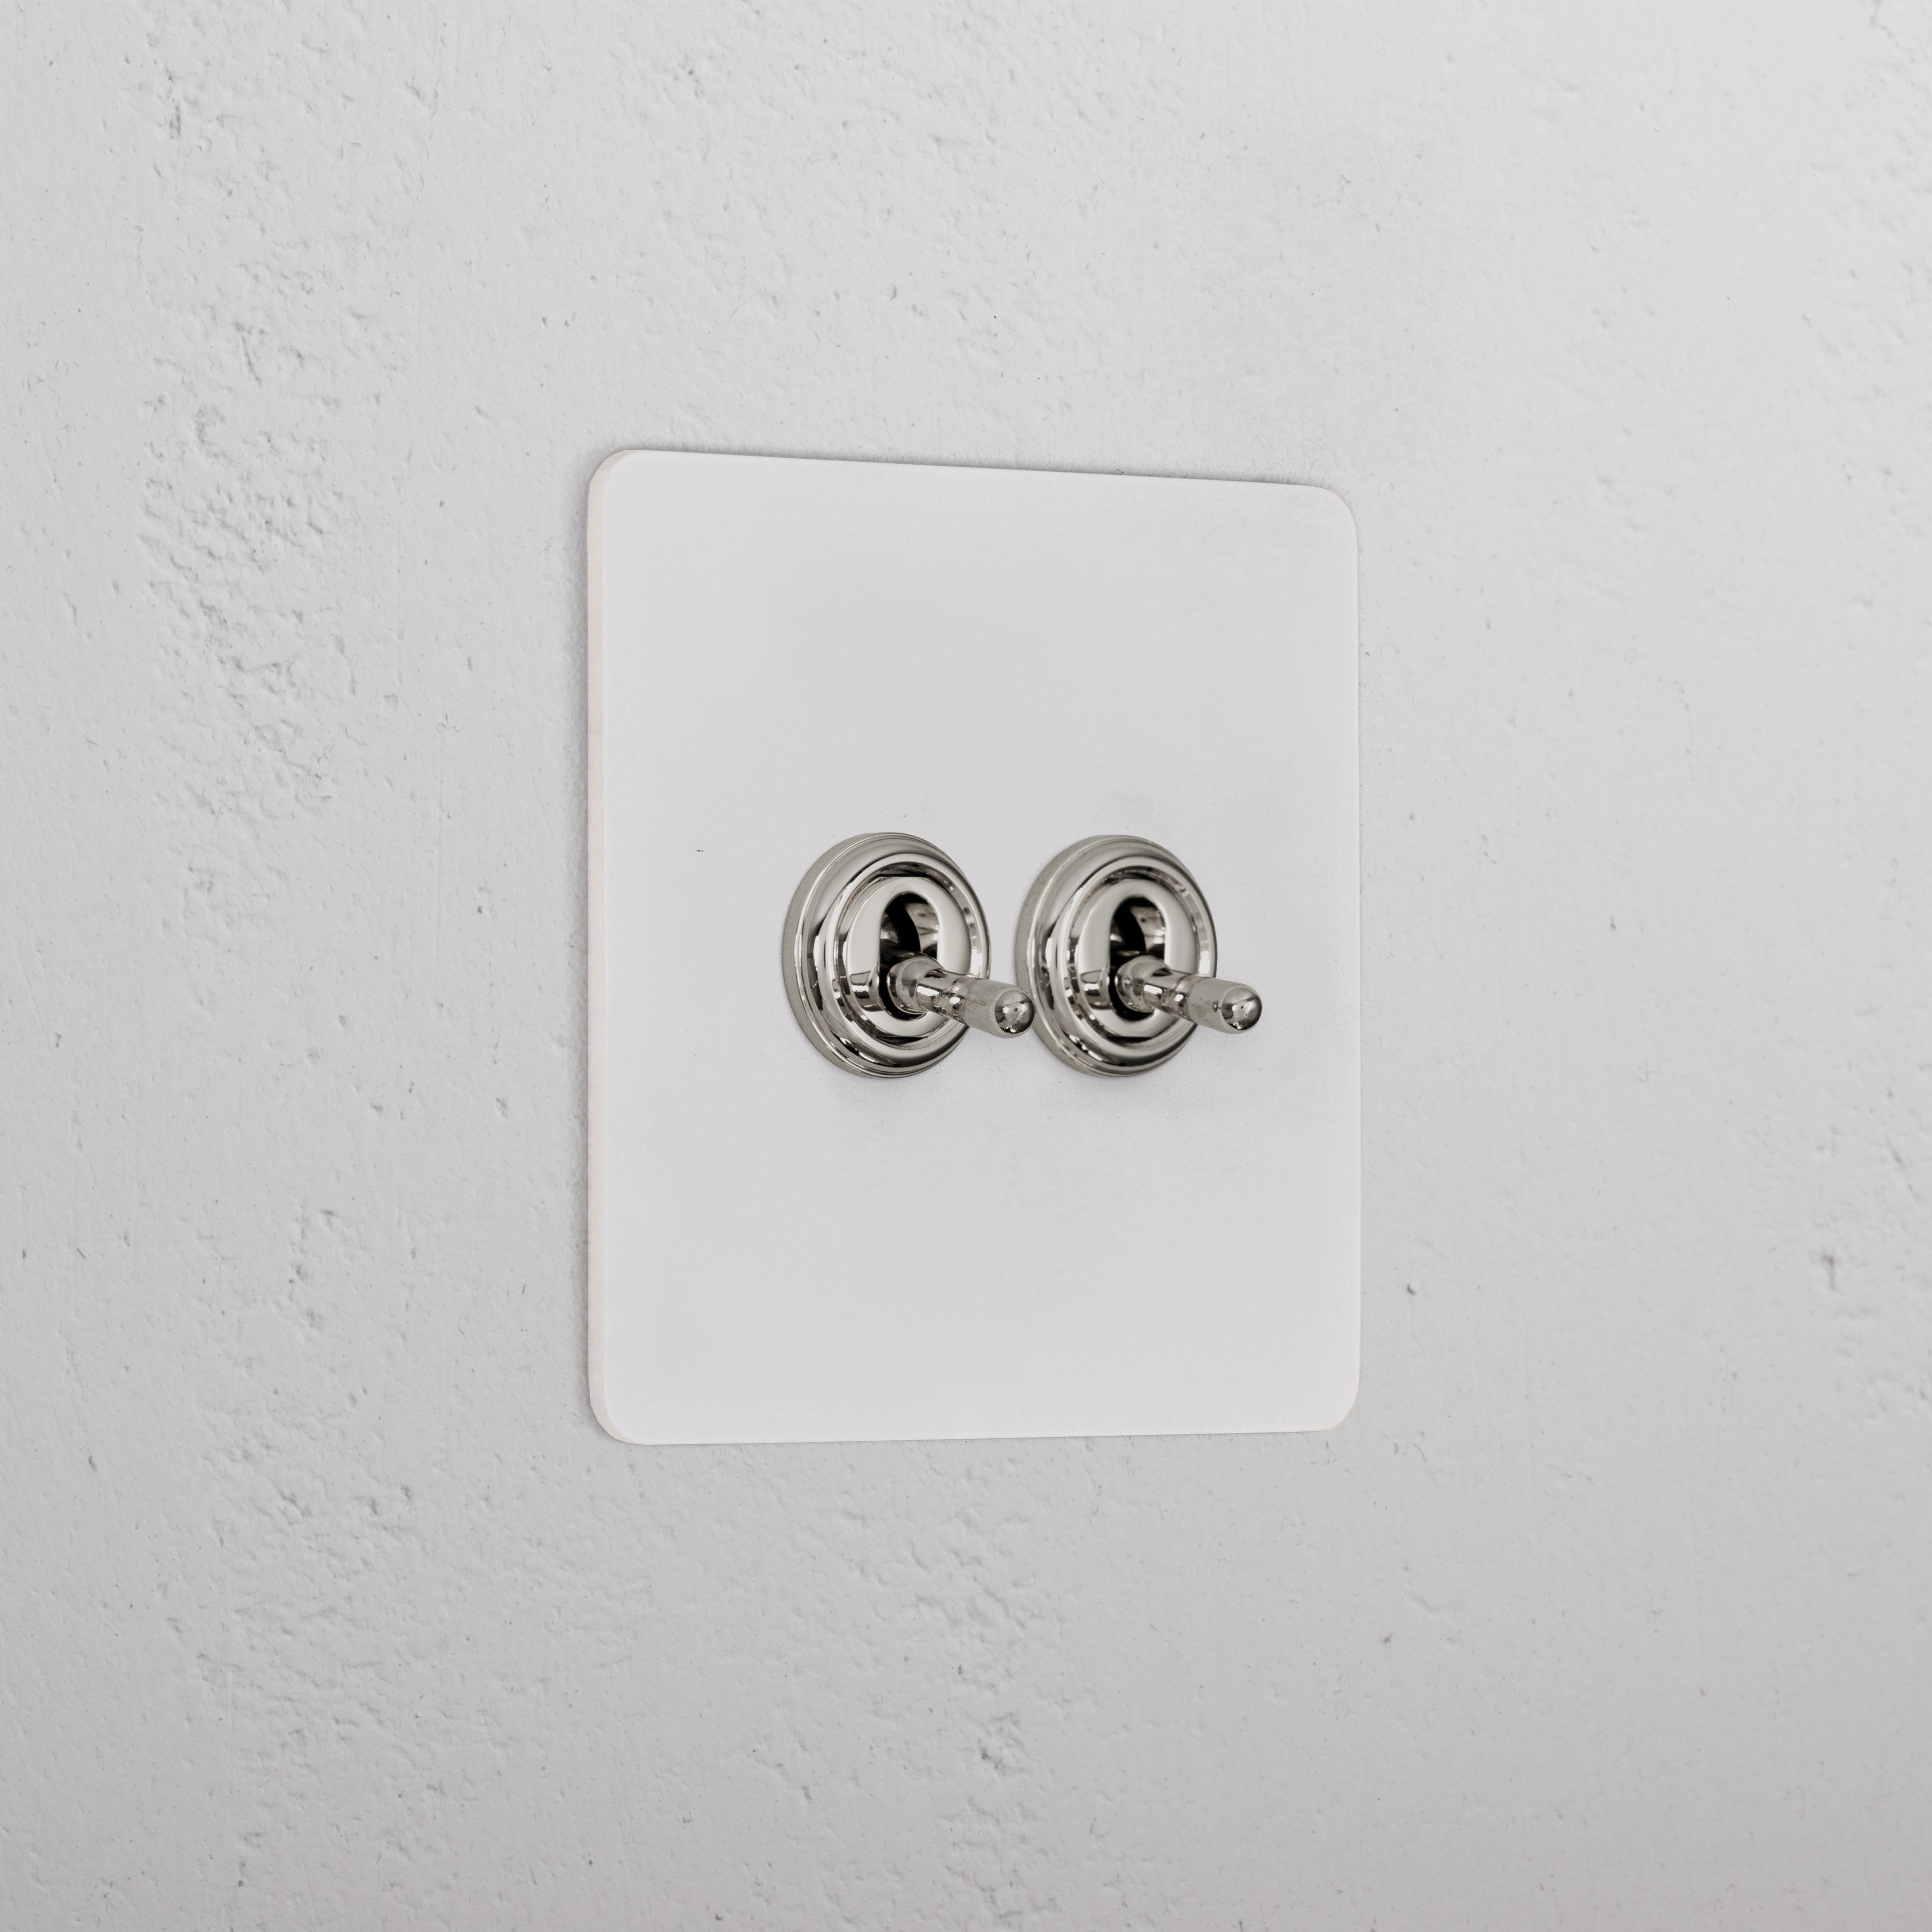 2G Two Way Toggle Switch _ Paintable Polished Nickel